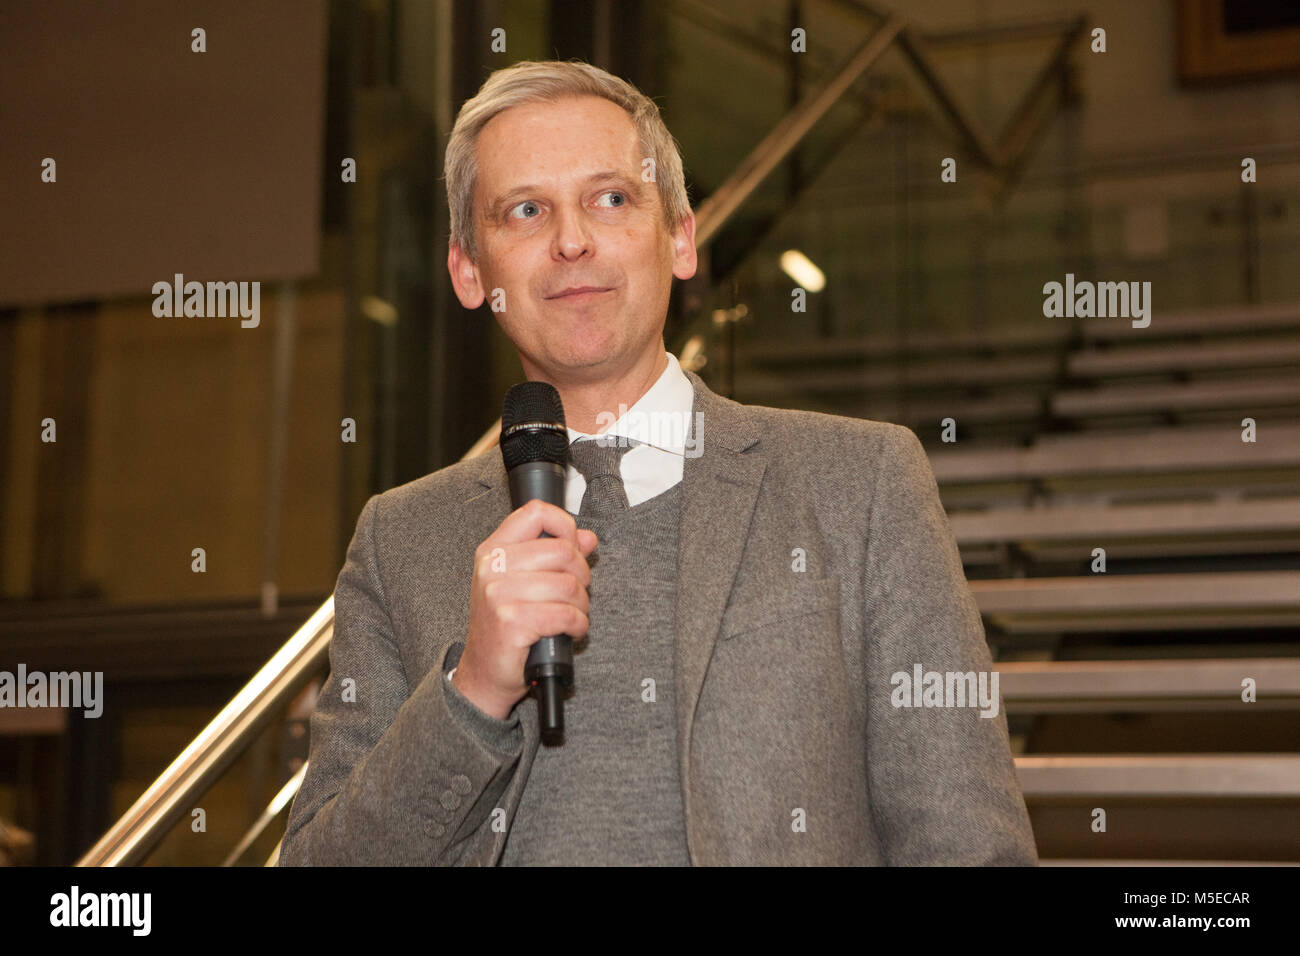 Alistair Hudson, who has controversially been sacked as Director of the Whitworth Art Gallery by the University of Manchester. Stock Photo